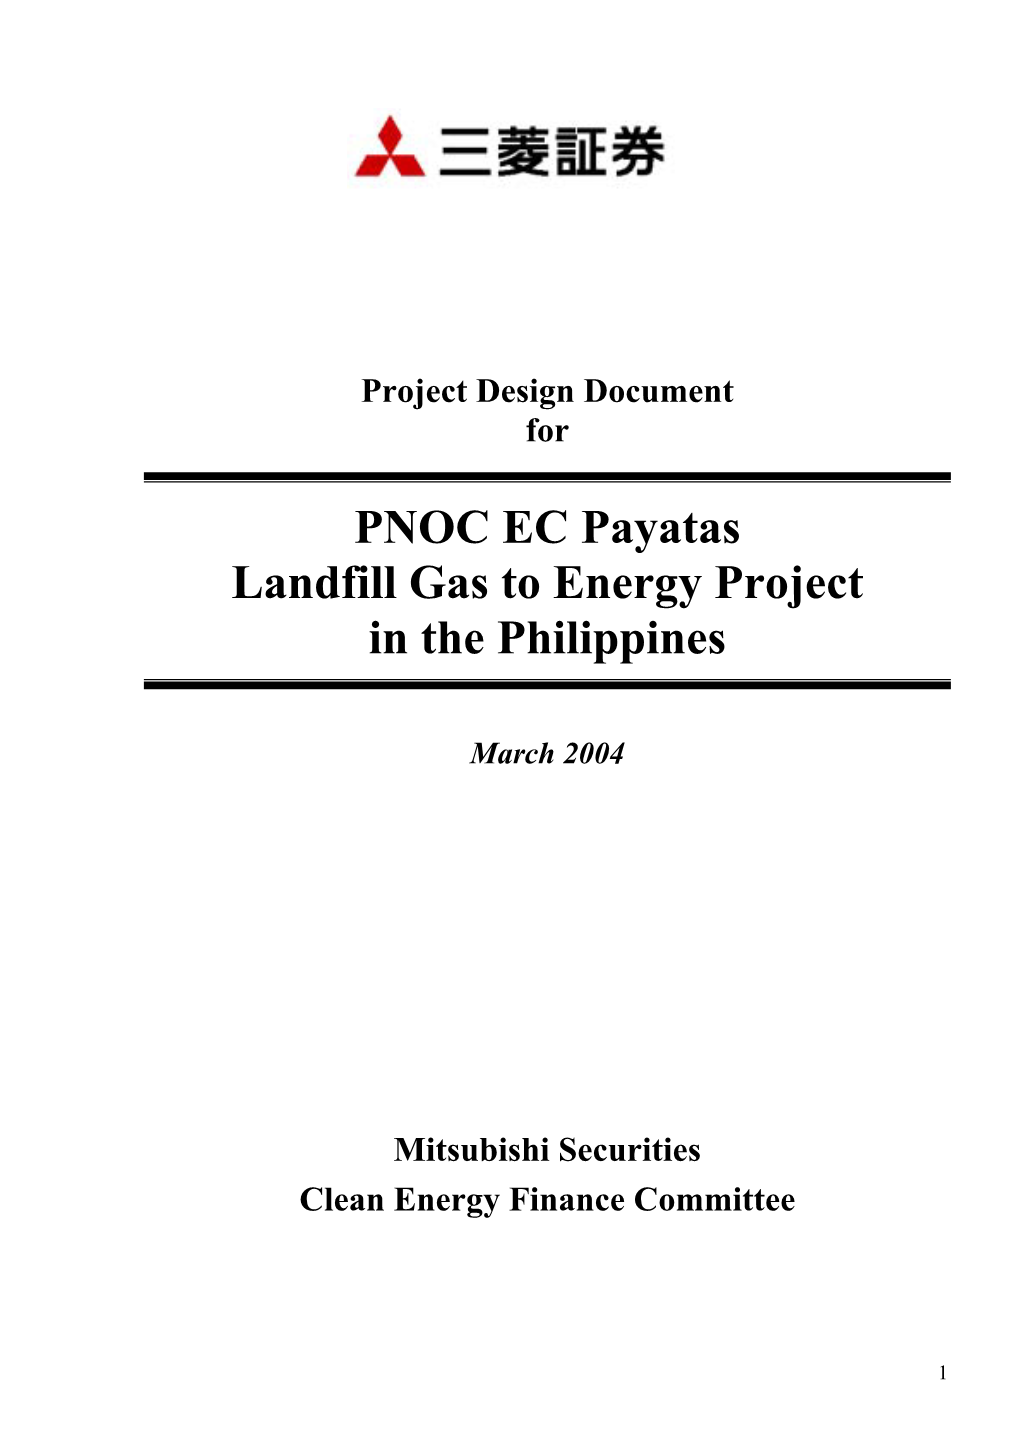 Payatas Landfill Gas to Energy Project in the Philippines